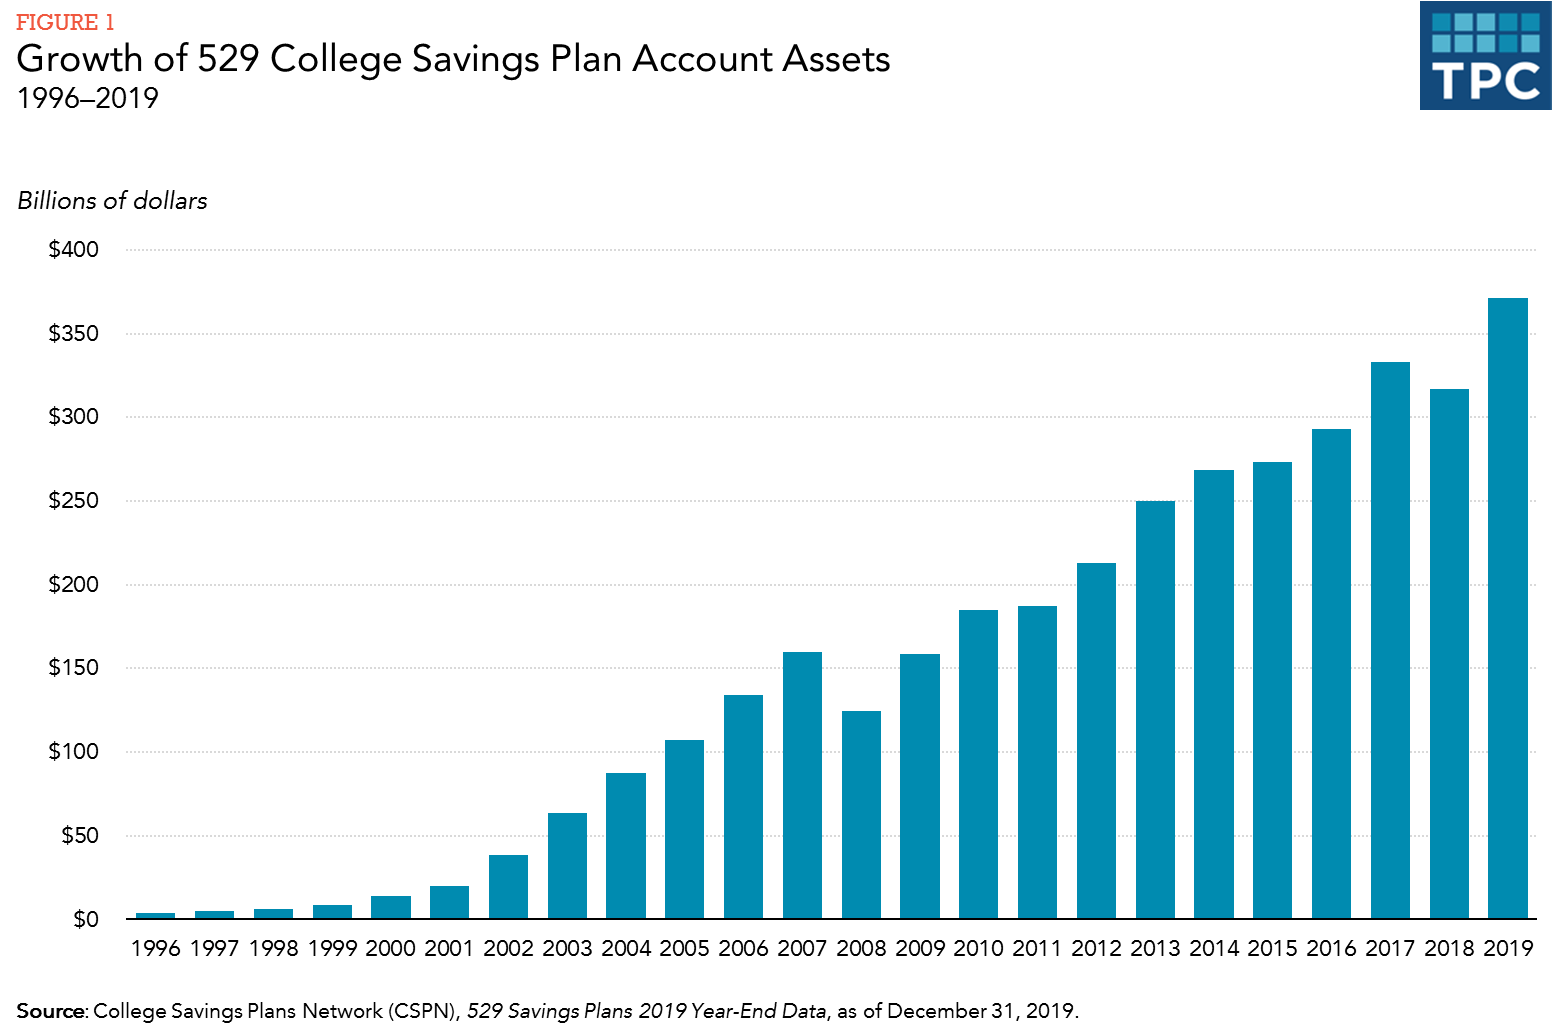 Bar chart showing total assets in 529 College Savings Plan each year from 1996 to 2019 in billions of dollars.